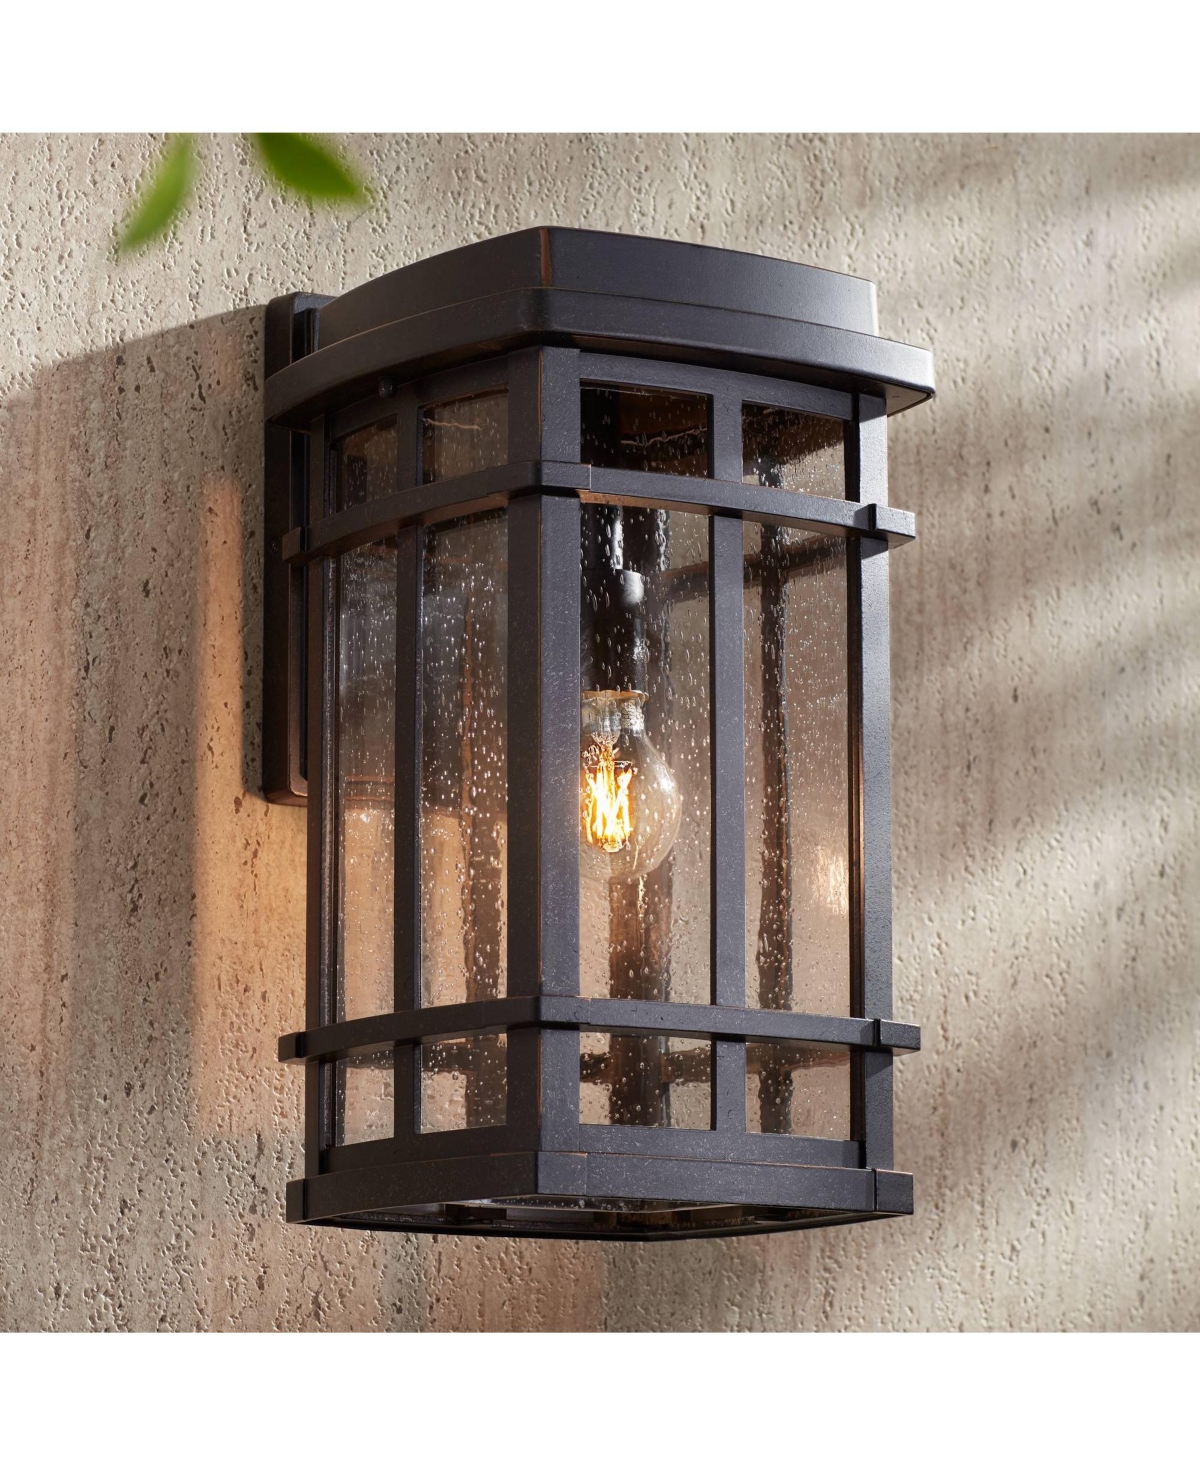 Neri Mission Industrial Box-Shaped Outdoor Wall Light Fixture Oil Rubbed Bronze 16" Clear Seedy Glass for Exterior House Porch Patio Outside Deck Fron